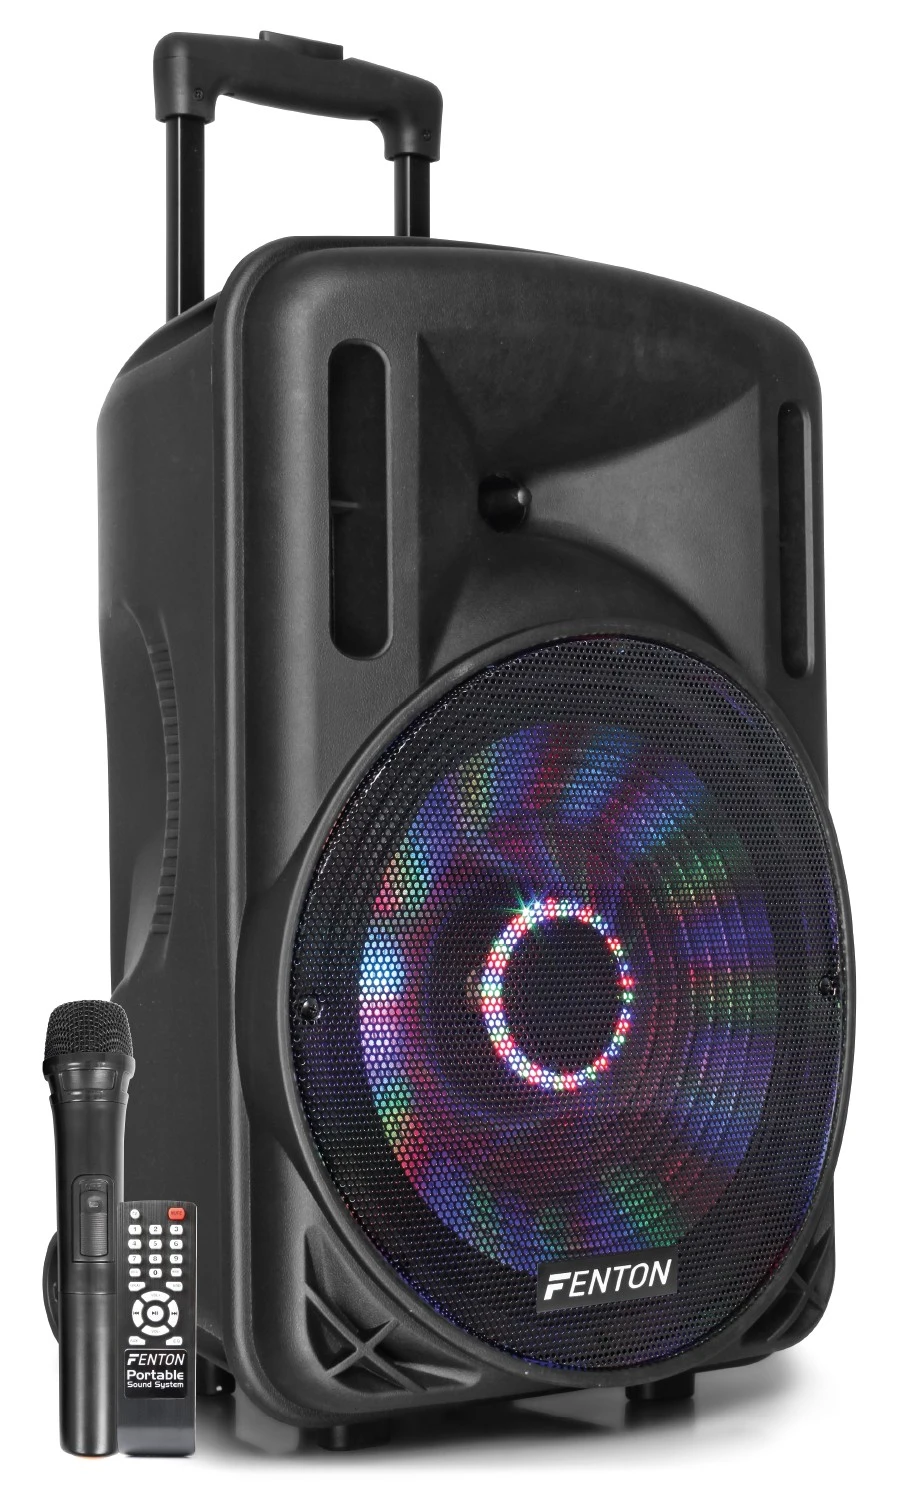 Plons Peuter Uitsluiting Fenton Ft12led 12 "700w Portable Speaker With Battery, Bluetooth, Mp3/usb,  Led Lights, Microphone, Remote Control, Ref.170.092 - Speakers - AliExpress